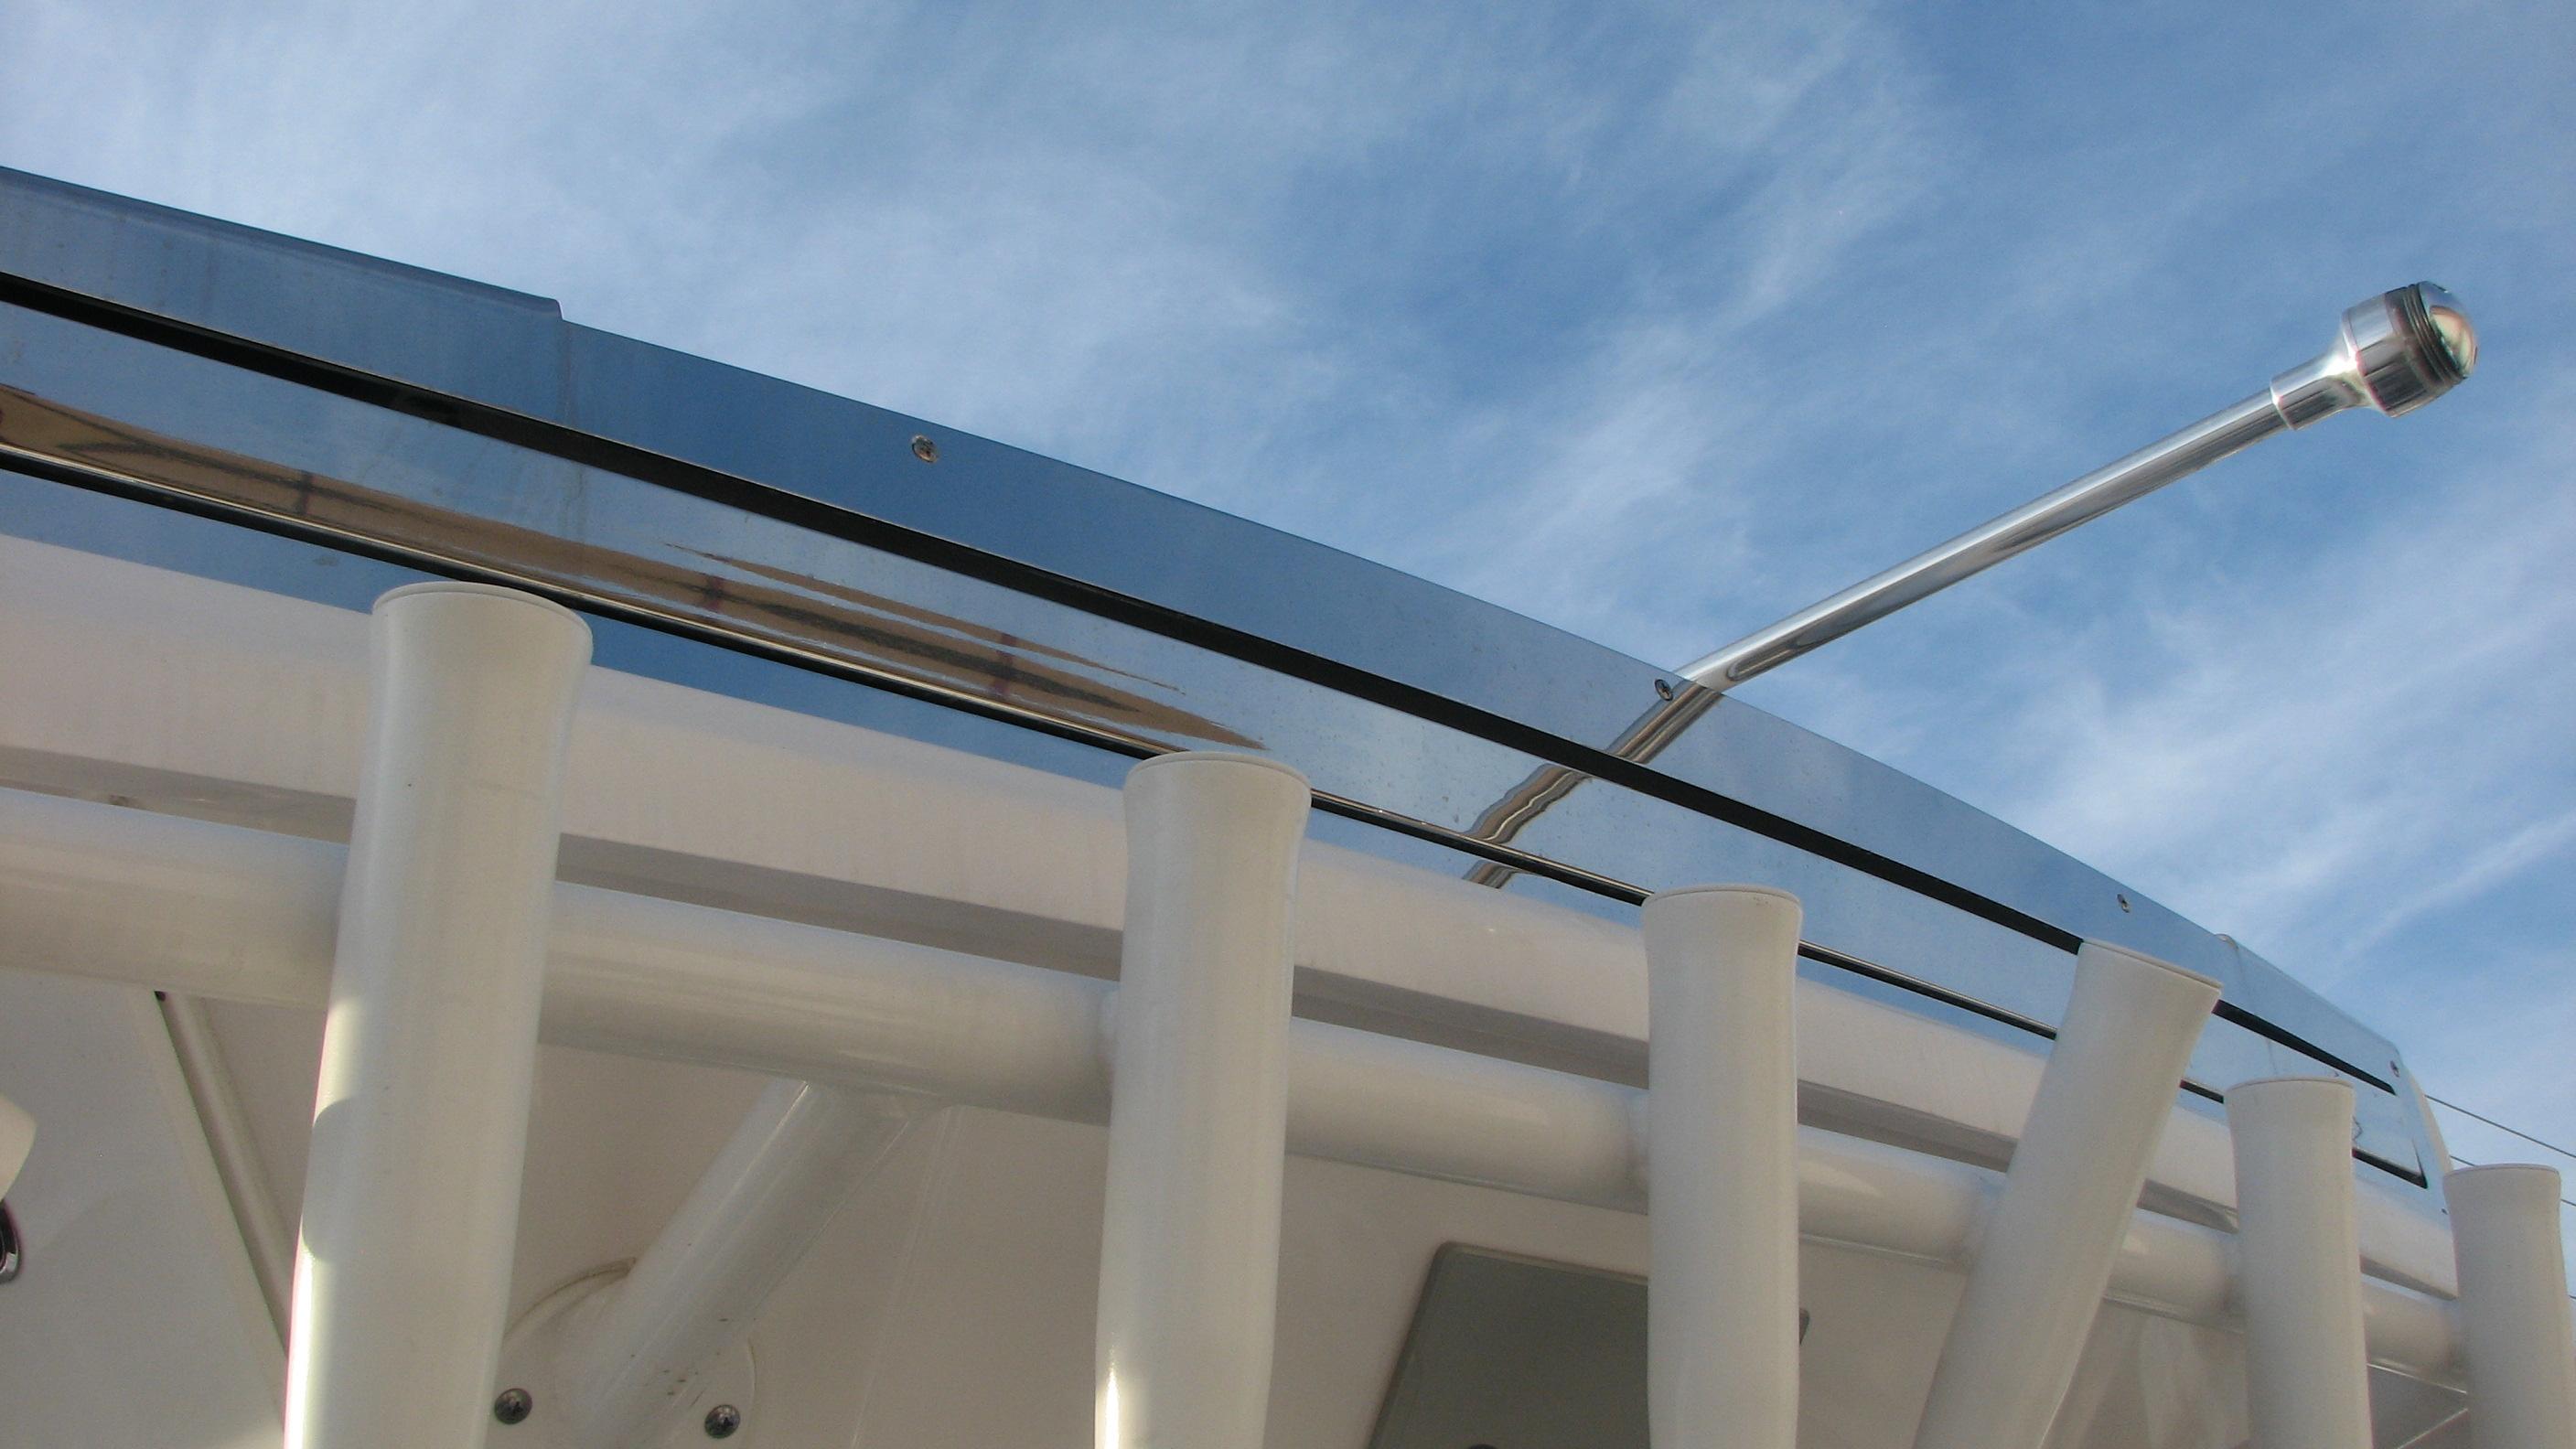 Retractable awning